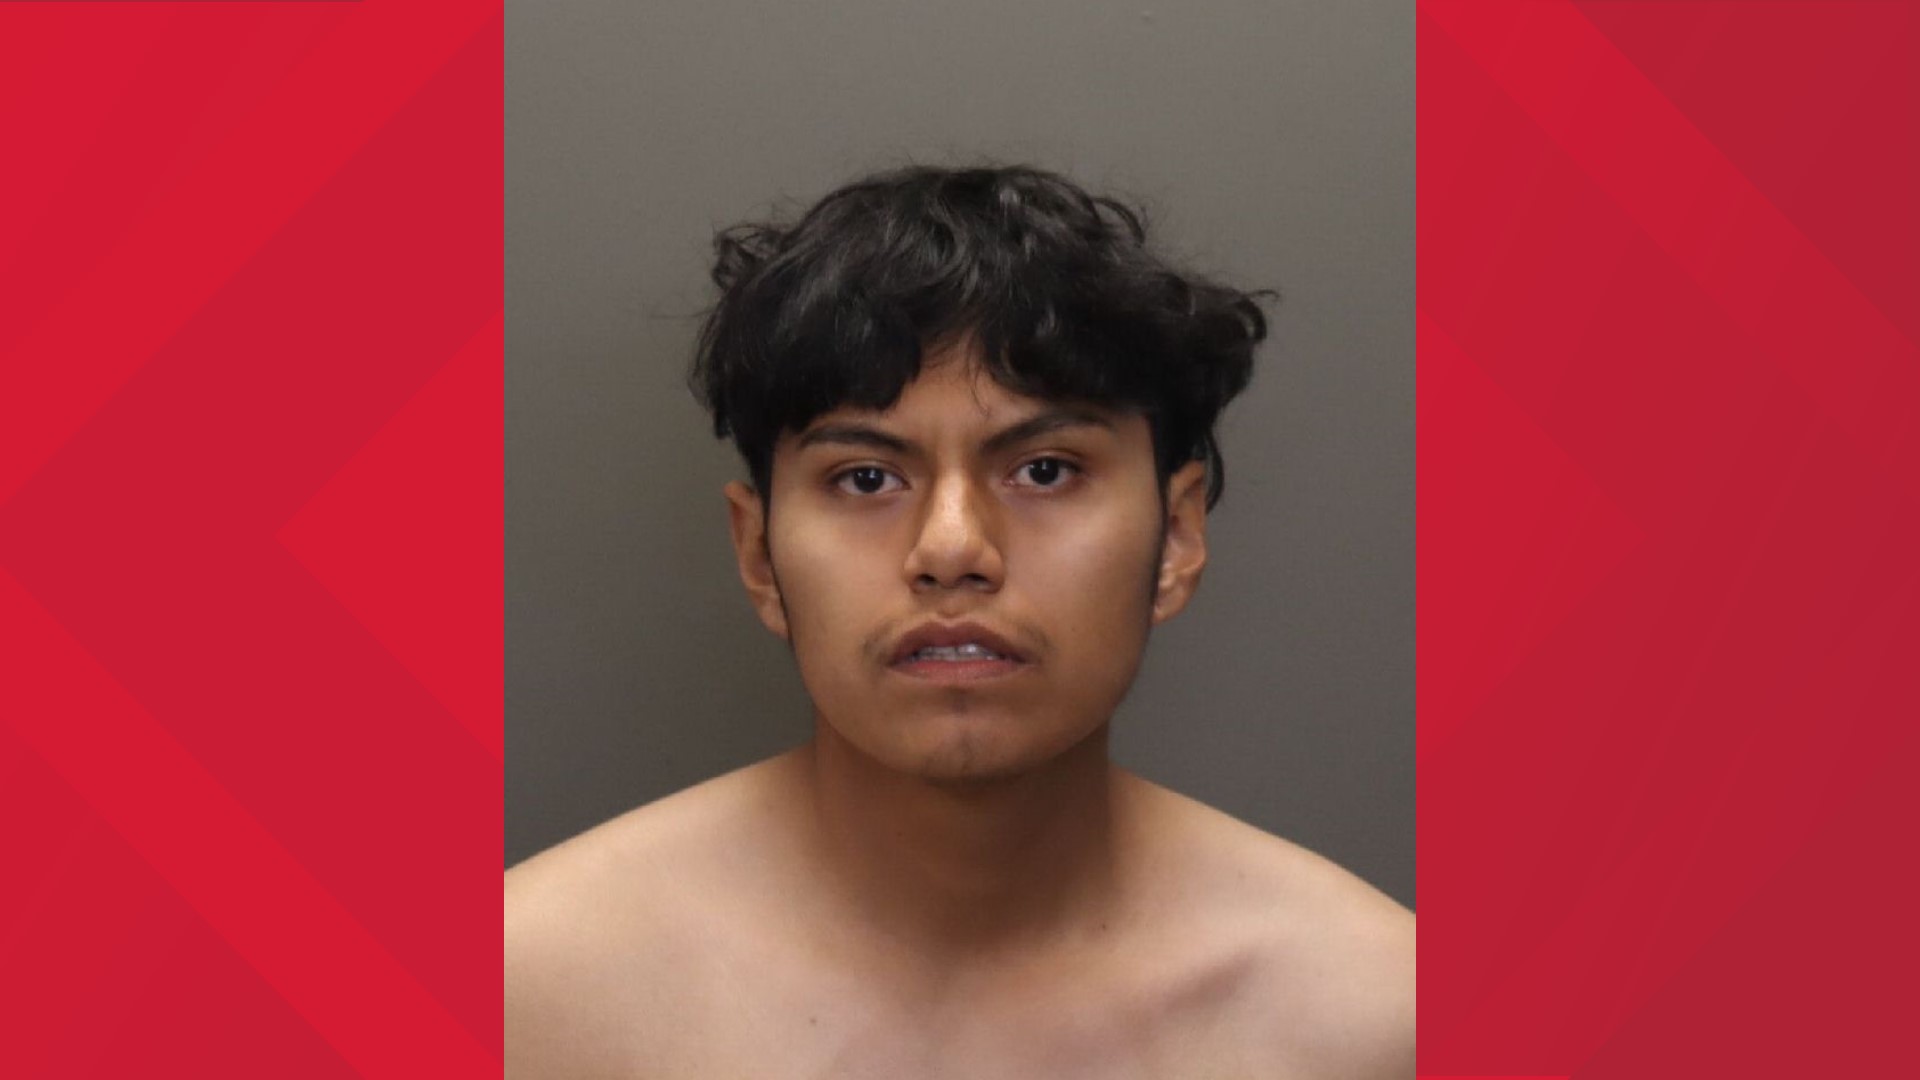 According to the Franklin County Sheriff's Office, 19-year-old Jaciel Santiago Martinez was charged Monday with one count of rape.